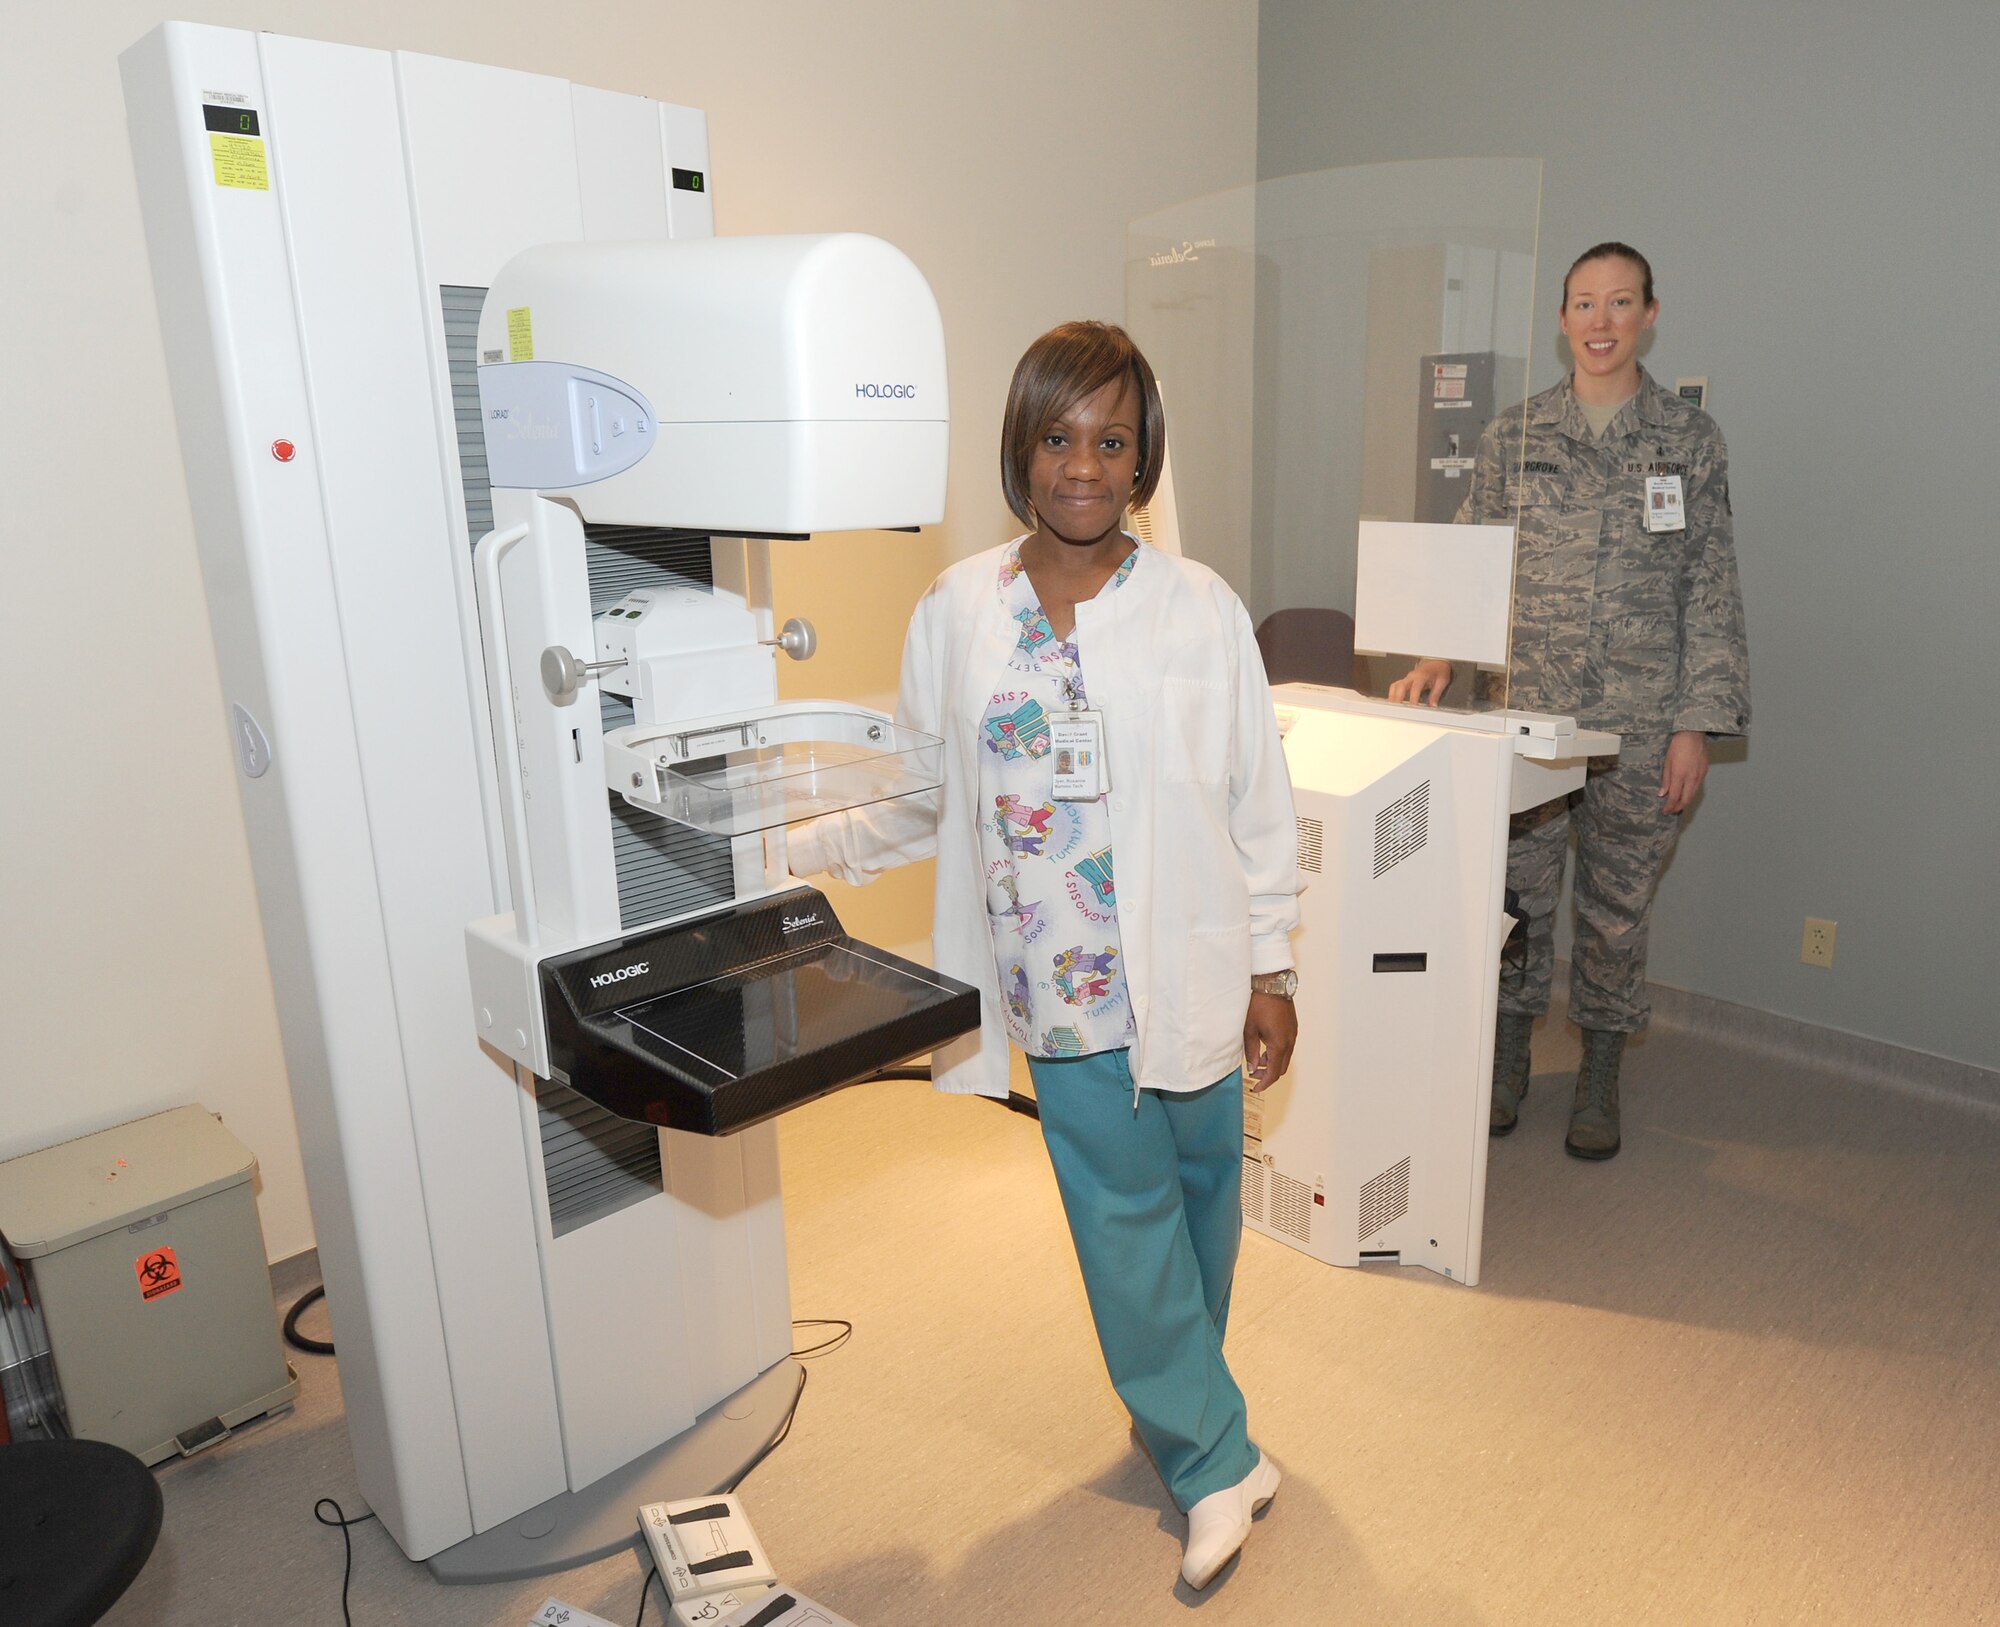 Ms. Roxanne Dyer and Staff Sgt. Catherine Hargrove, mammography technicians, demonstrate the leading edge digital mammography equipment at the David Grant USAF Medical Center. (U.S. Air Force photo/Staff Sgt. Liliana Moreno)